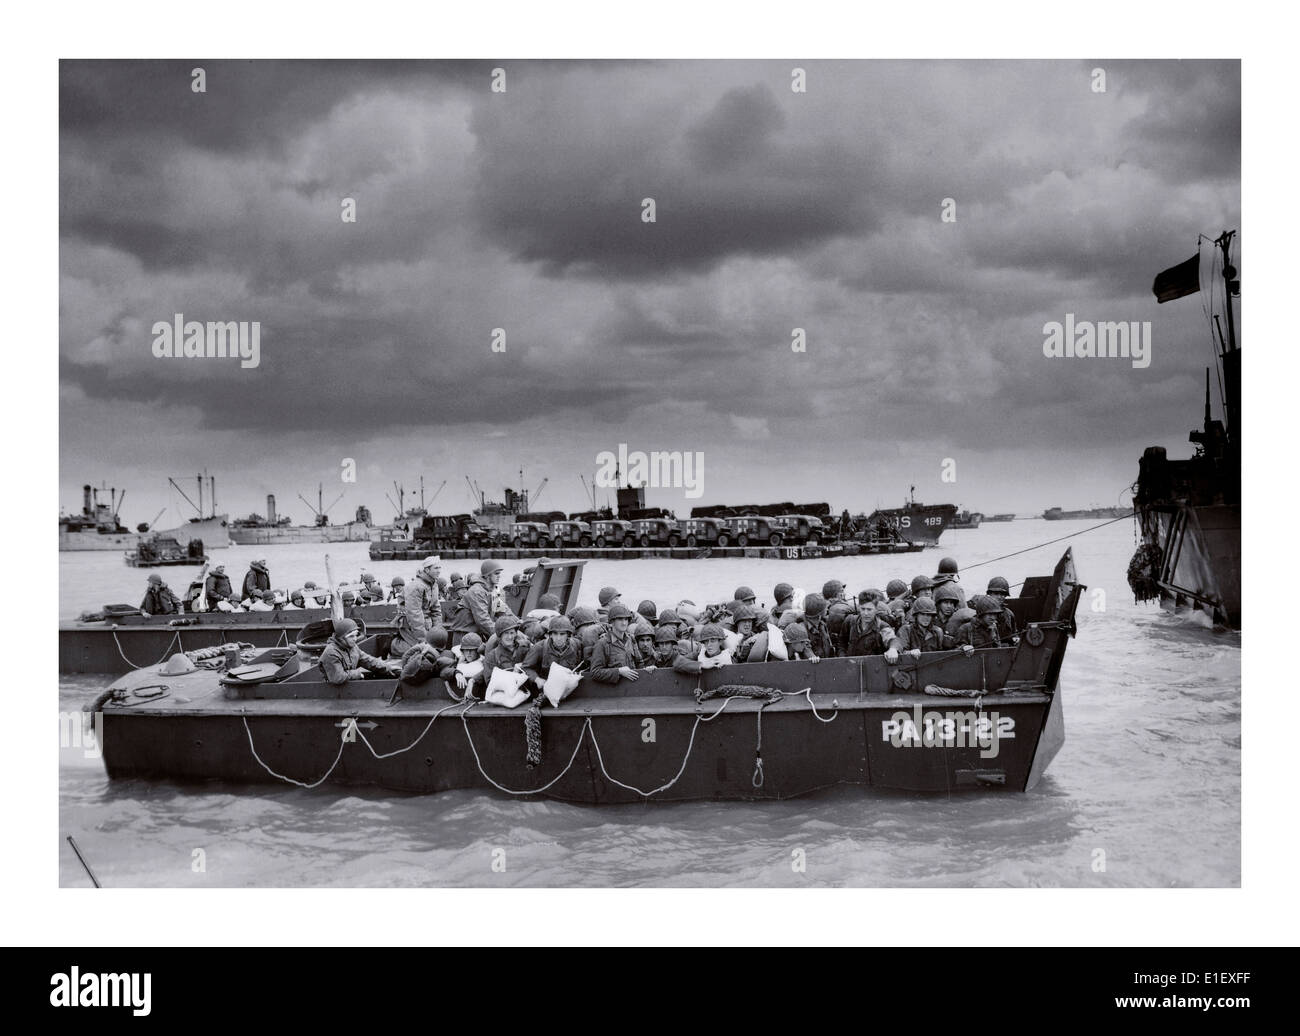 D-Day Omaha invasion, American troops in beach landing craft under dark skies Normandy France 6th June 1944 Stock Photo